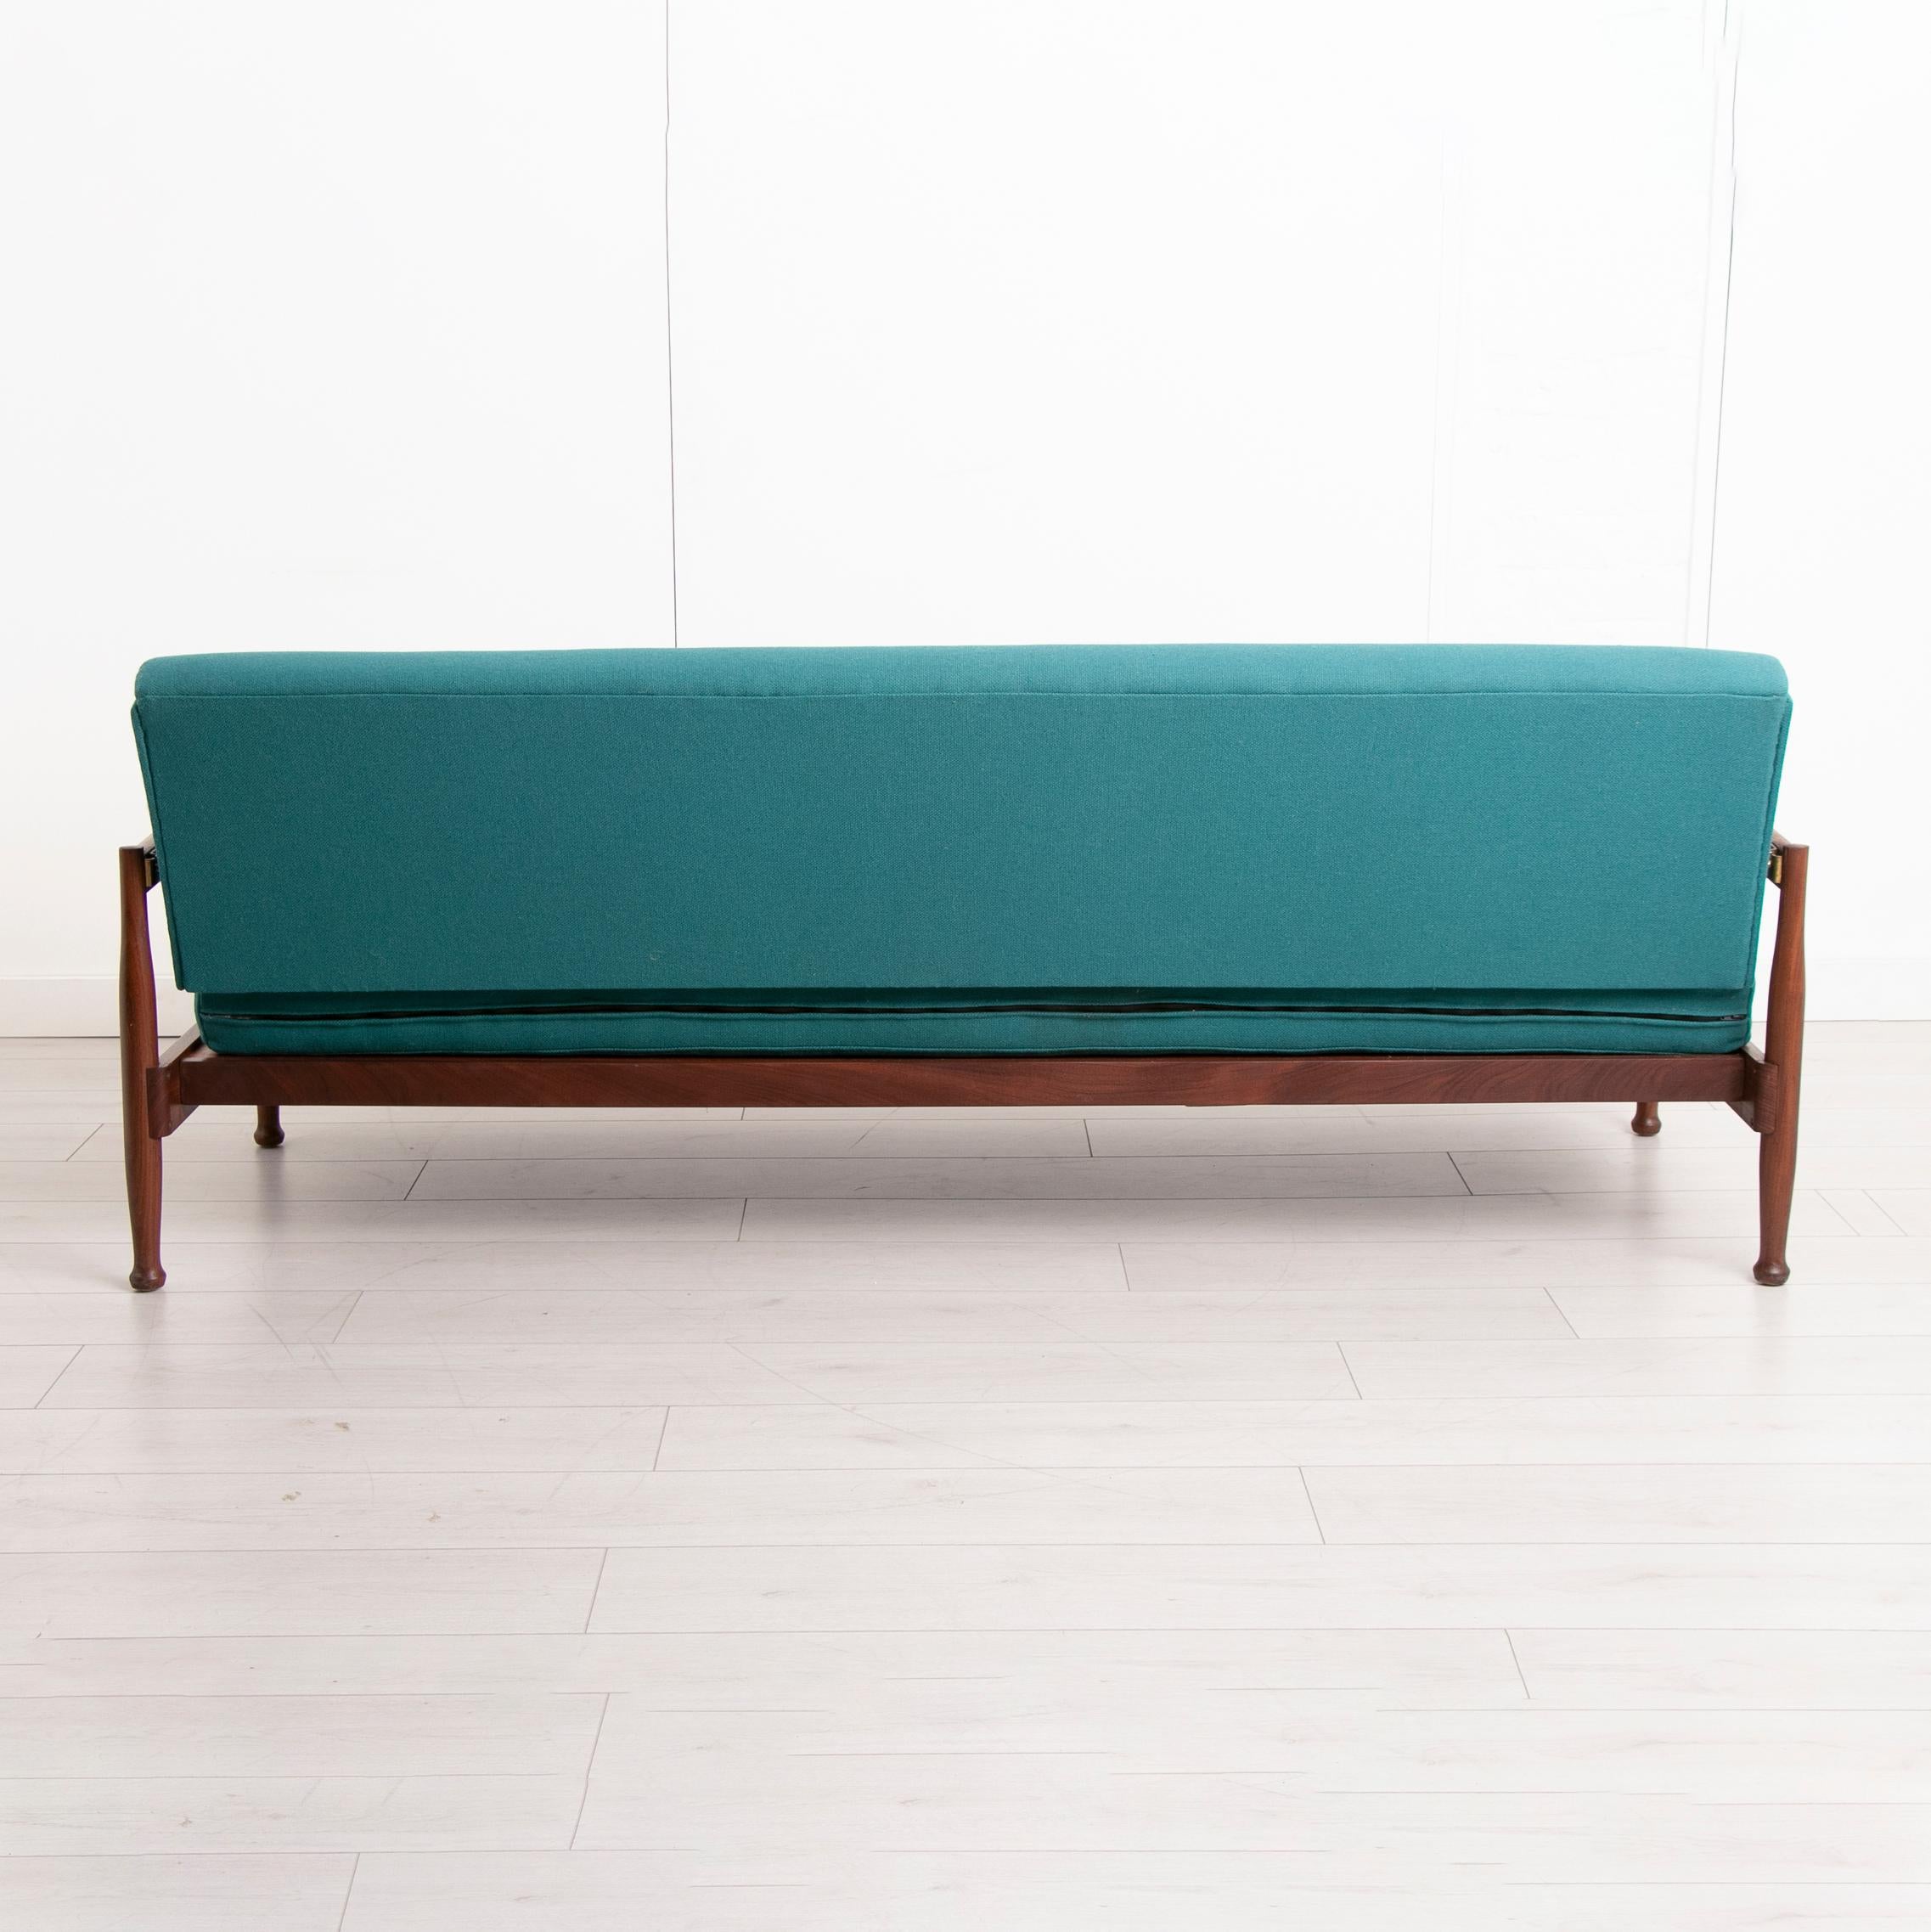 Midcentury Teak & Afrormosia Day Bed by Guy Rogers c.1960 4